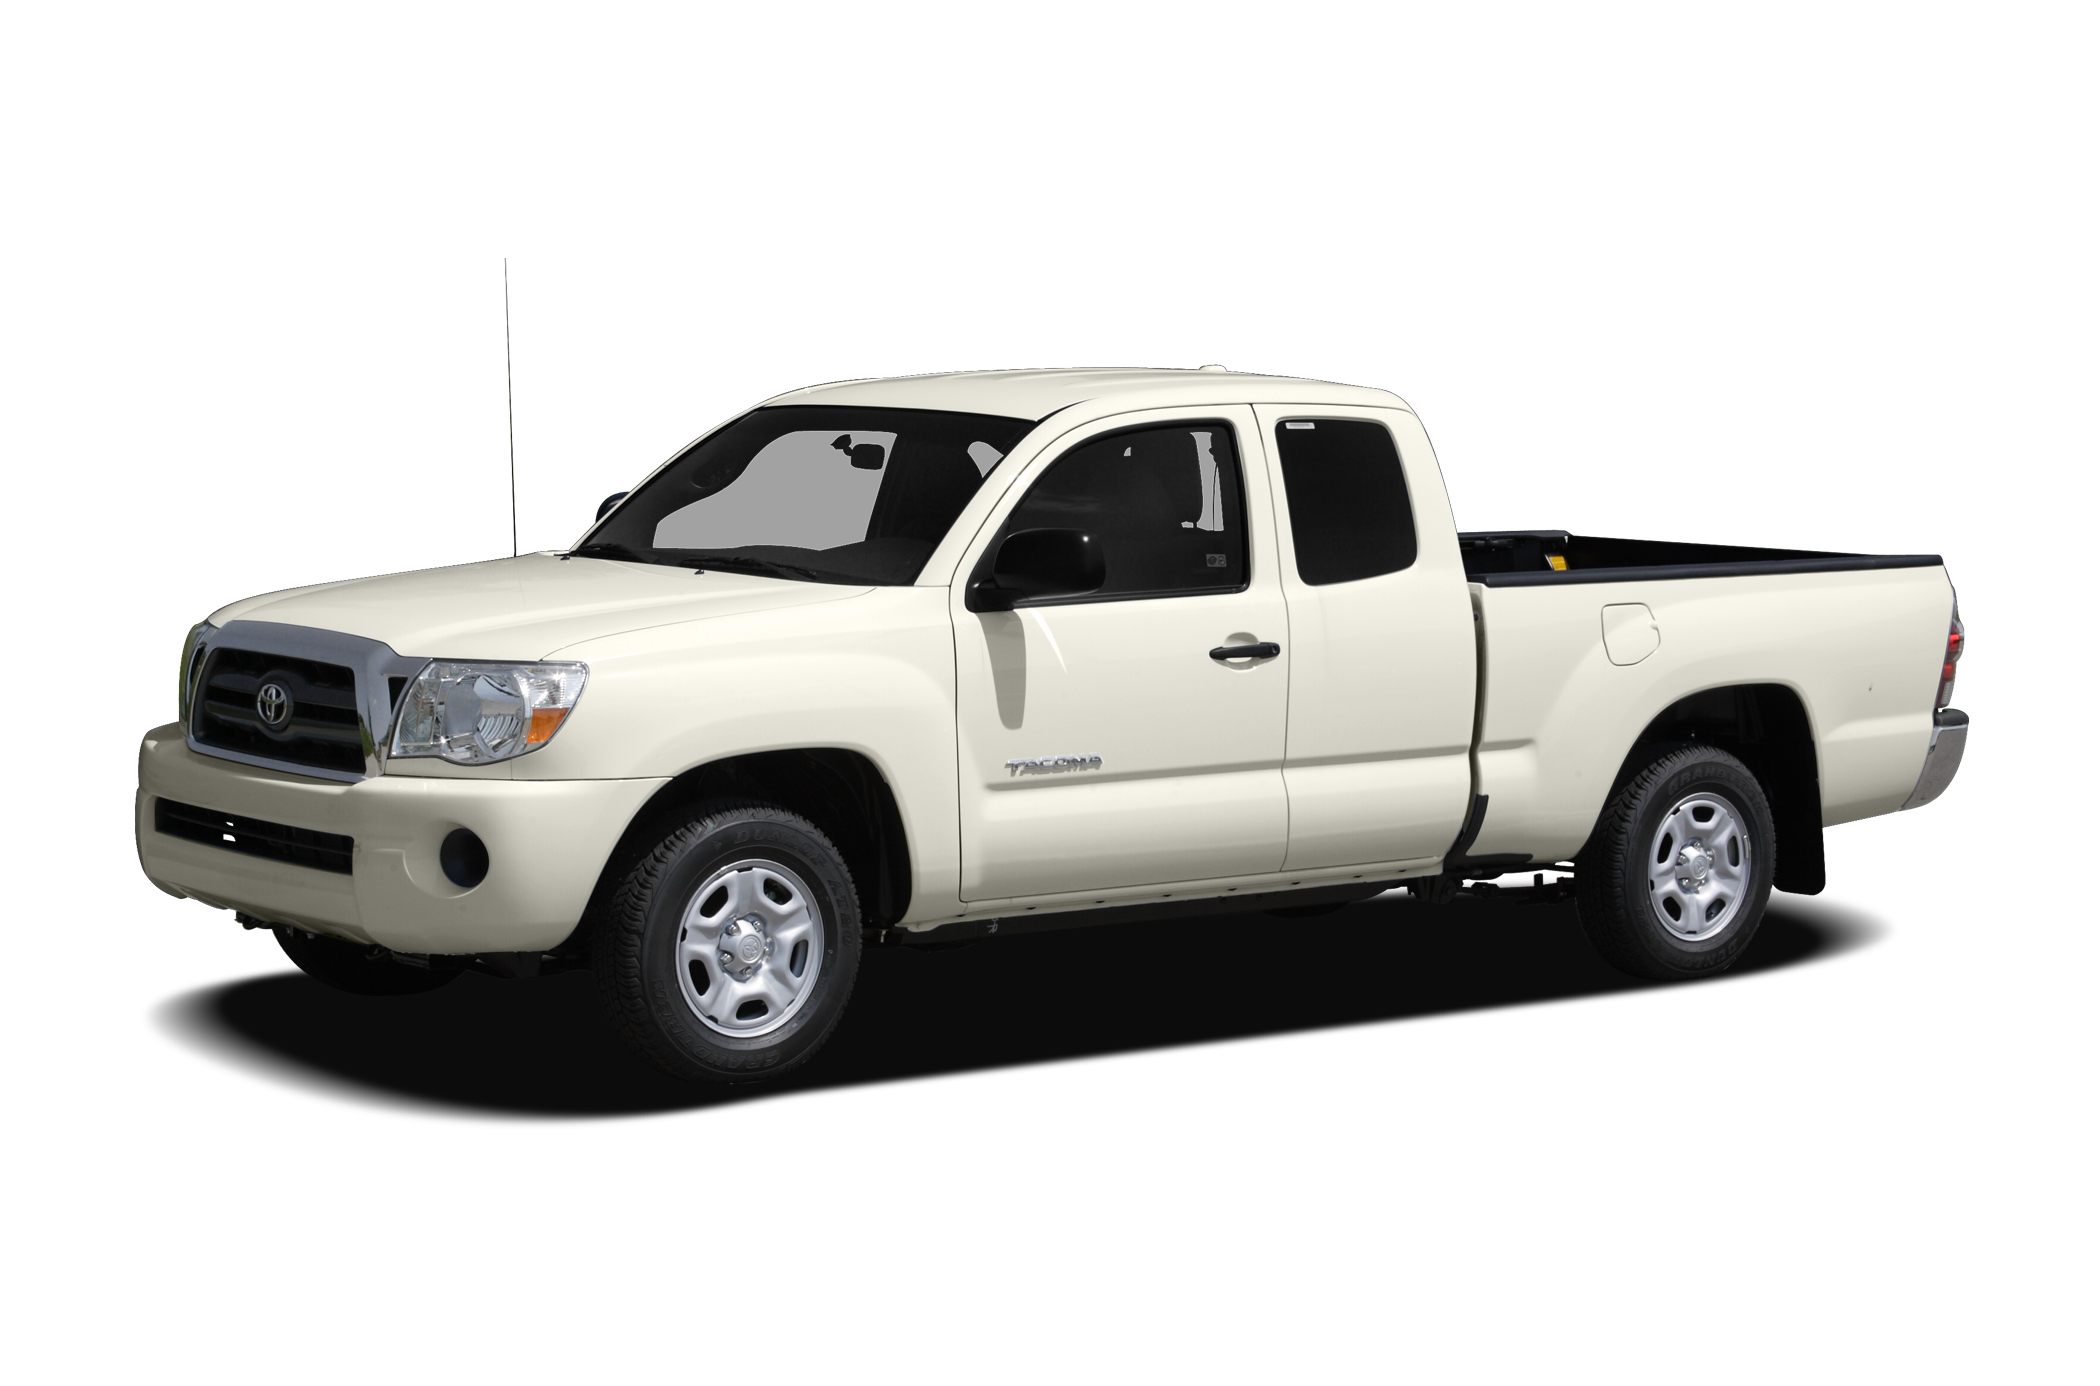 09 Toyota Tacoma X Runner V6 4x2 Access Cab 127 2 In Wb Specs And Prices